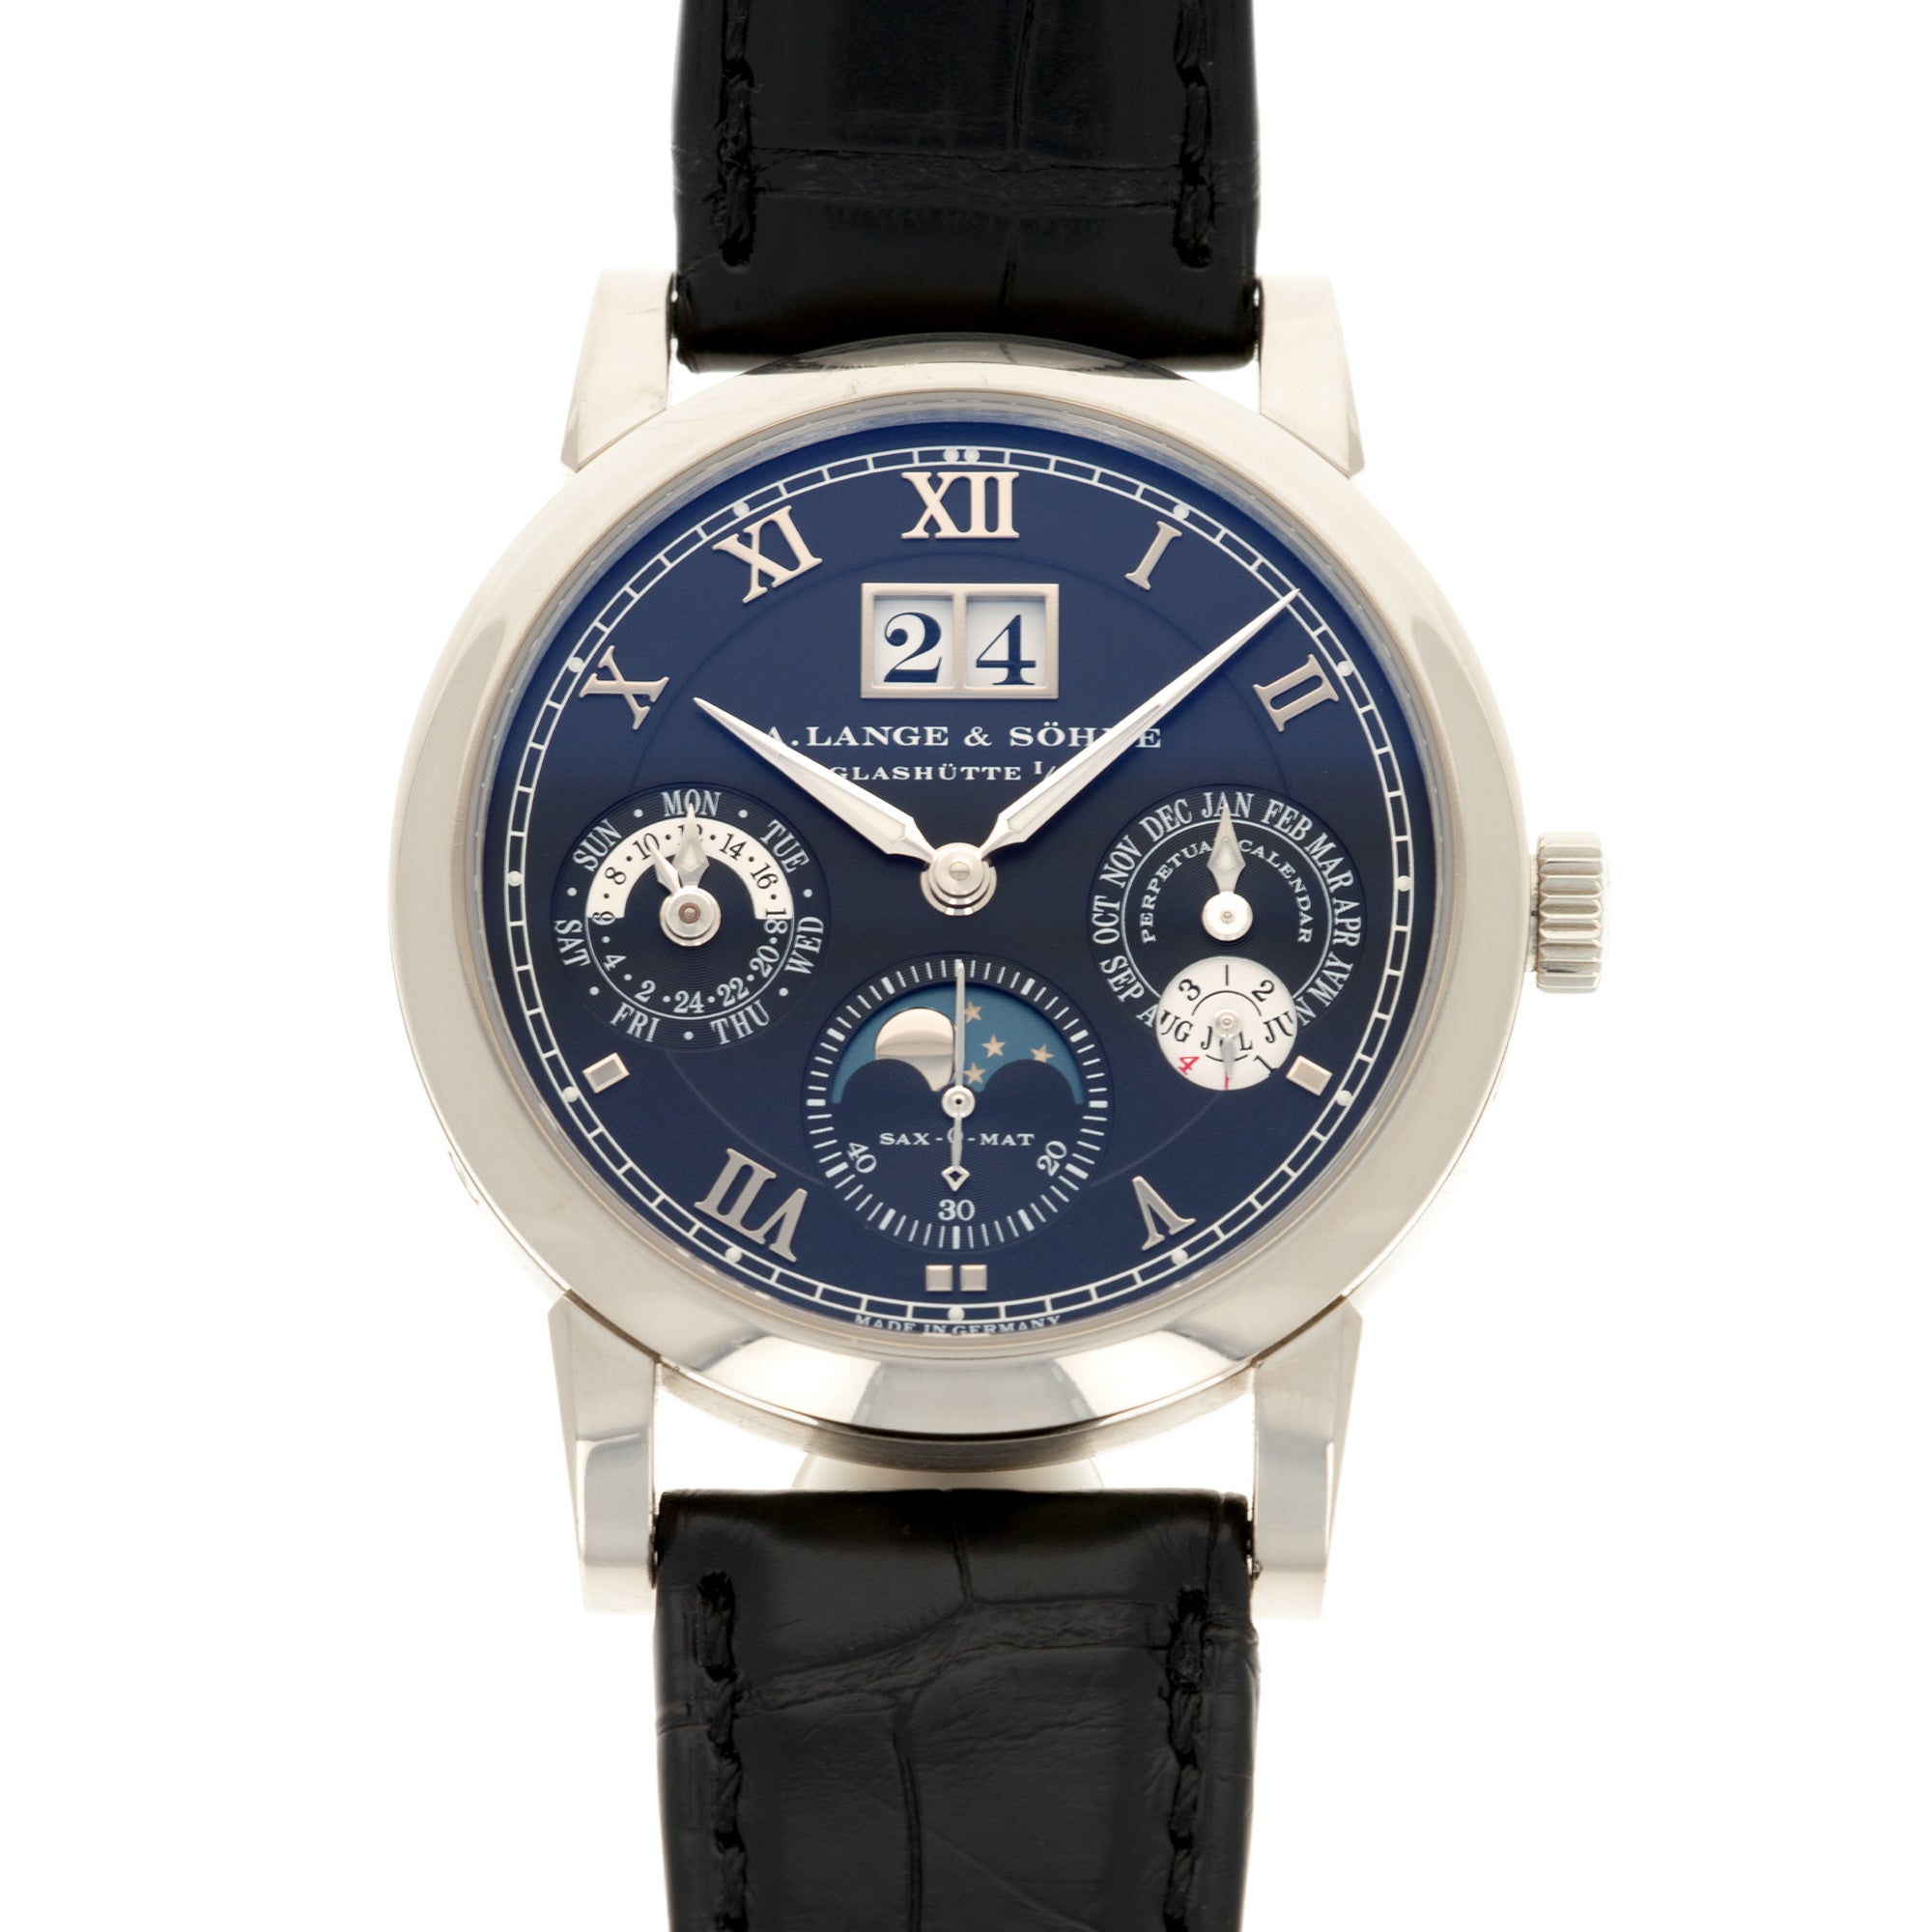 A. Lange & Sohne - A. Lange & Sohne White Gold Perpetual Calendar Watch Ref. 310.026 - The Keystone Watches